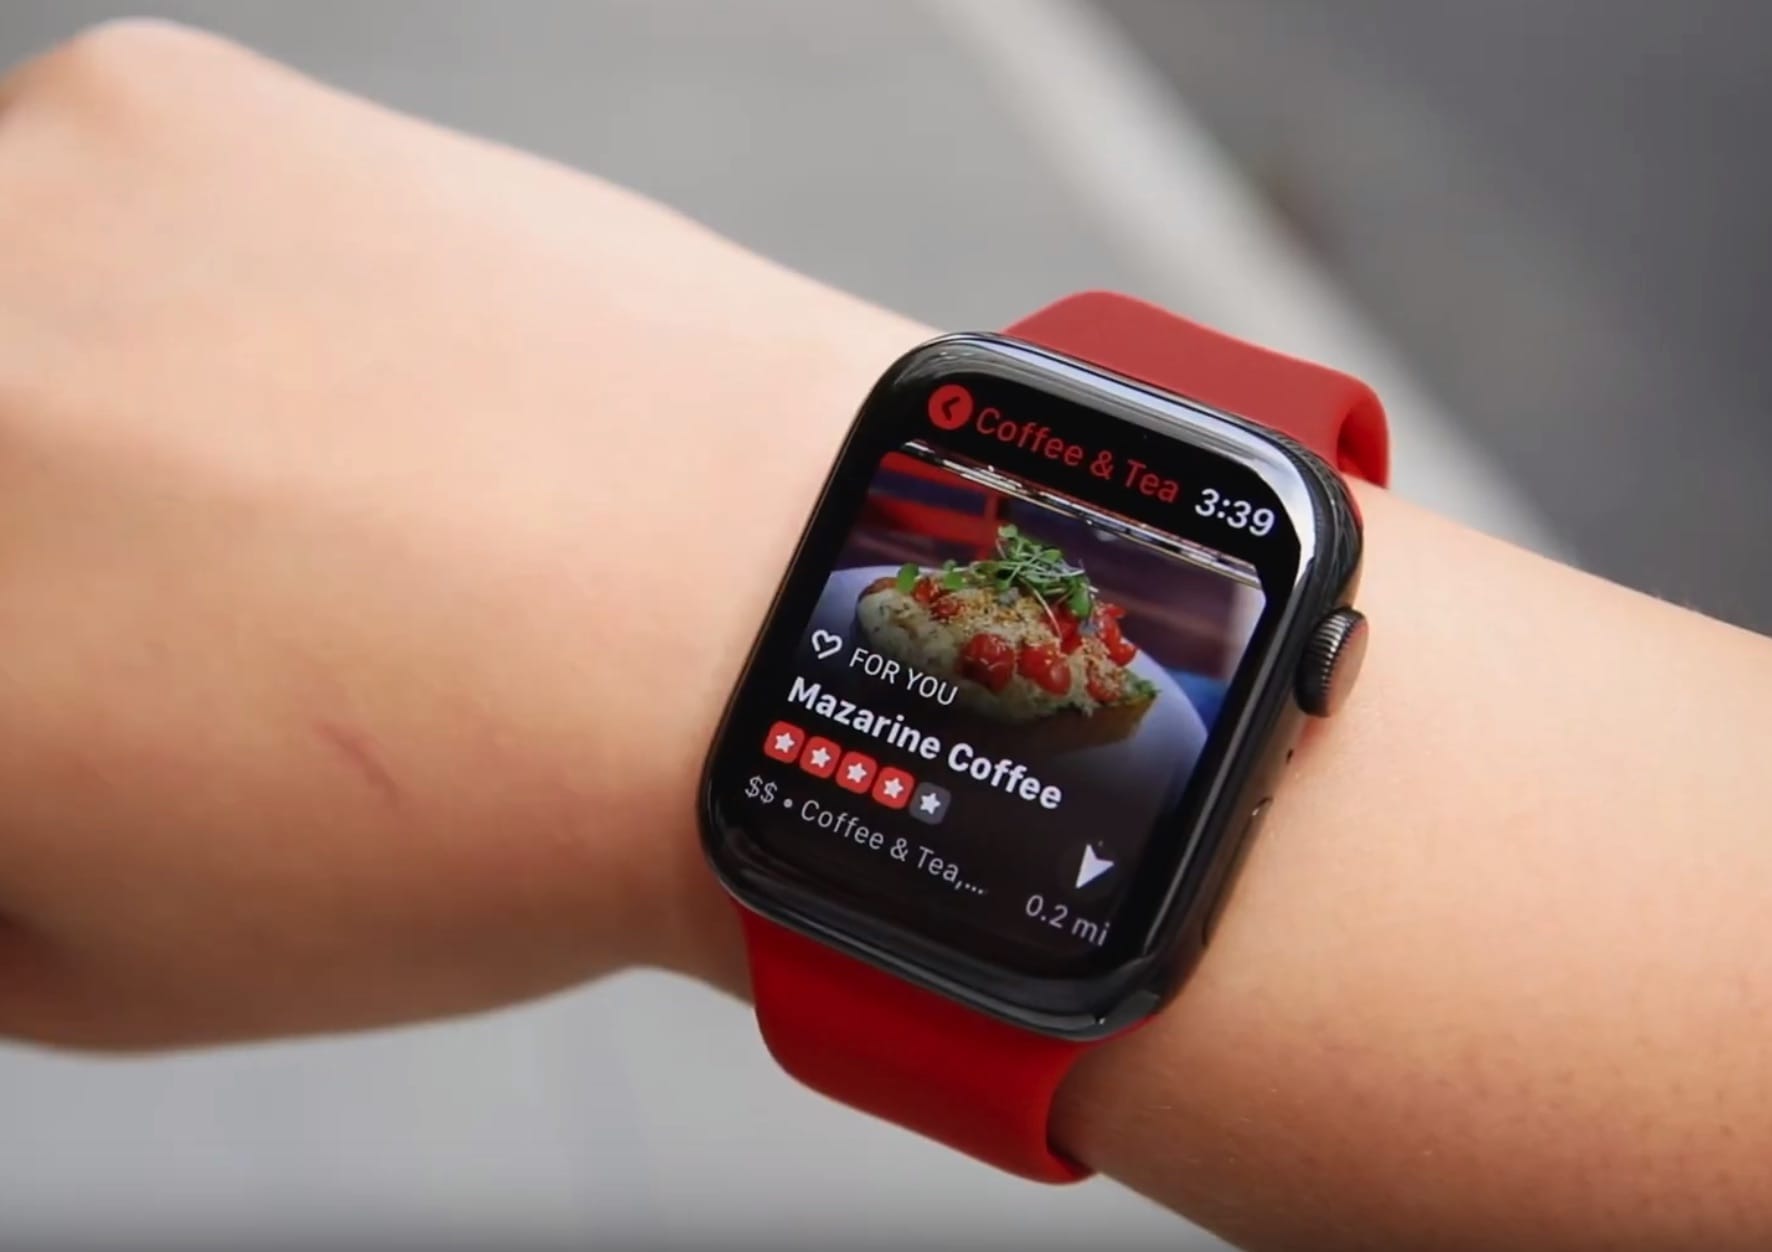 Yelp uses Apple Watch compass to make finding things easier